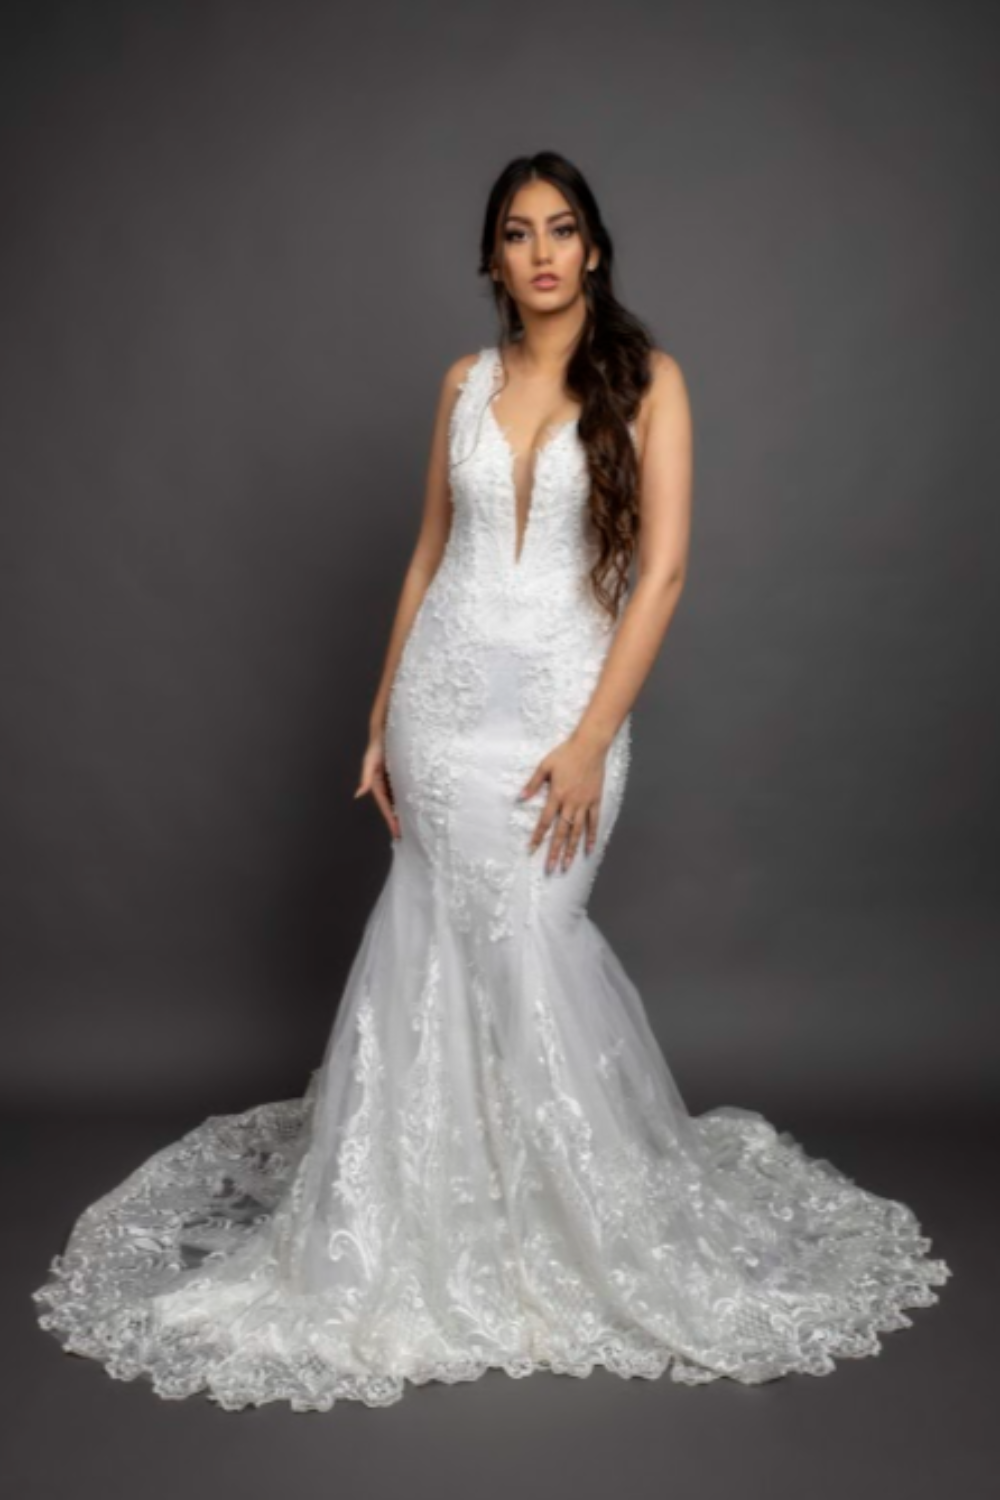 Latest Collections - Le Vow Bridal